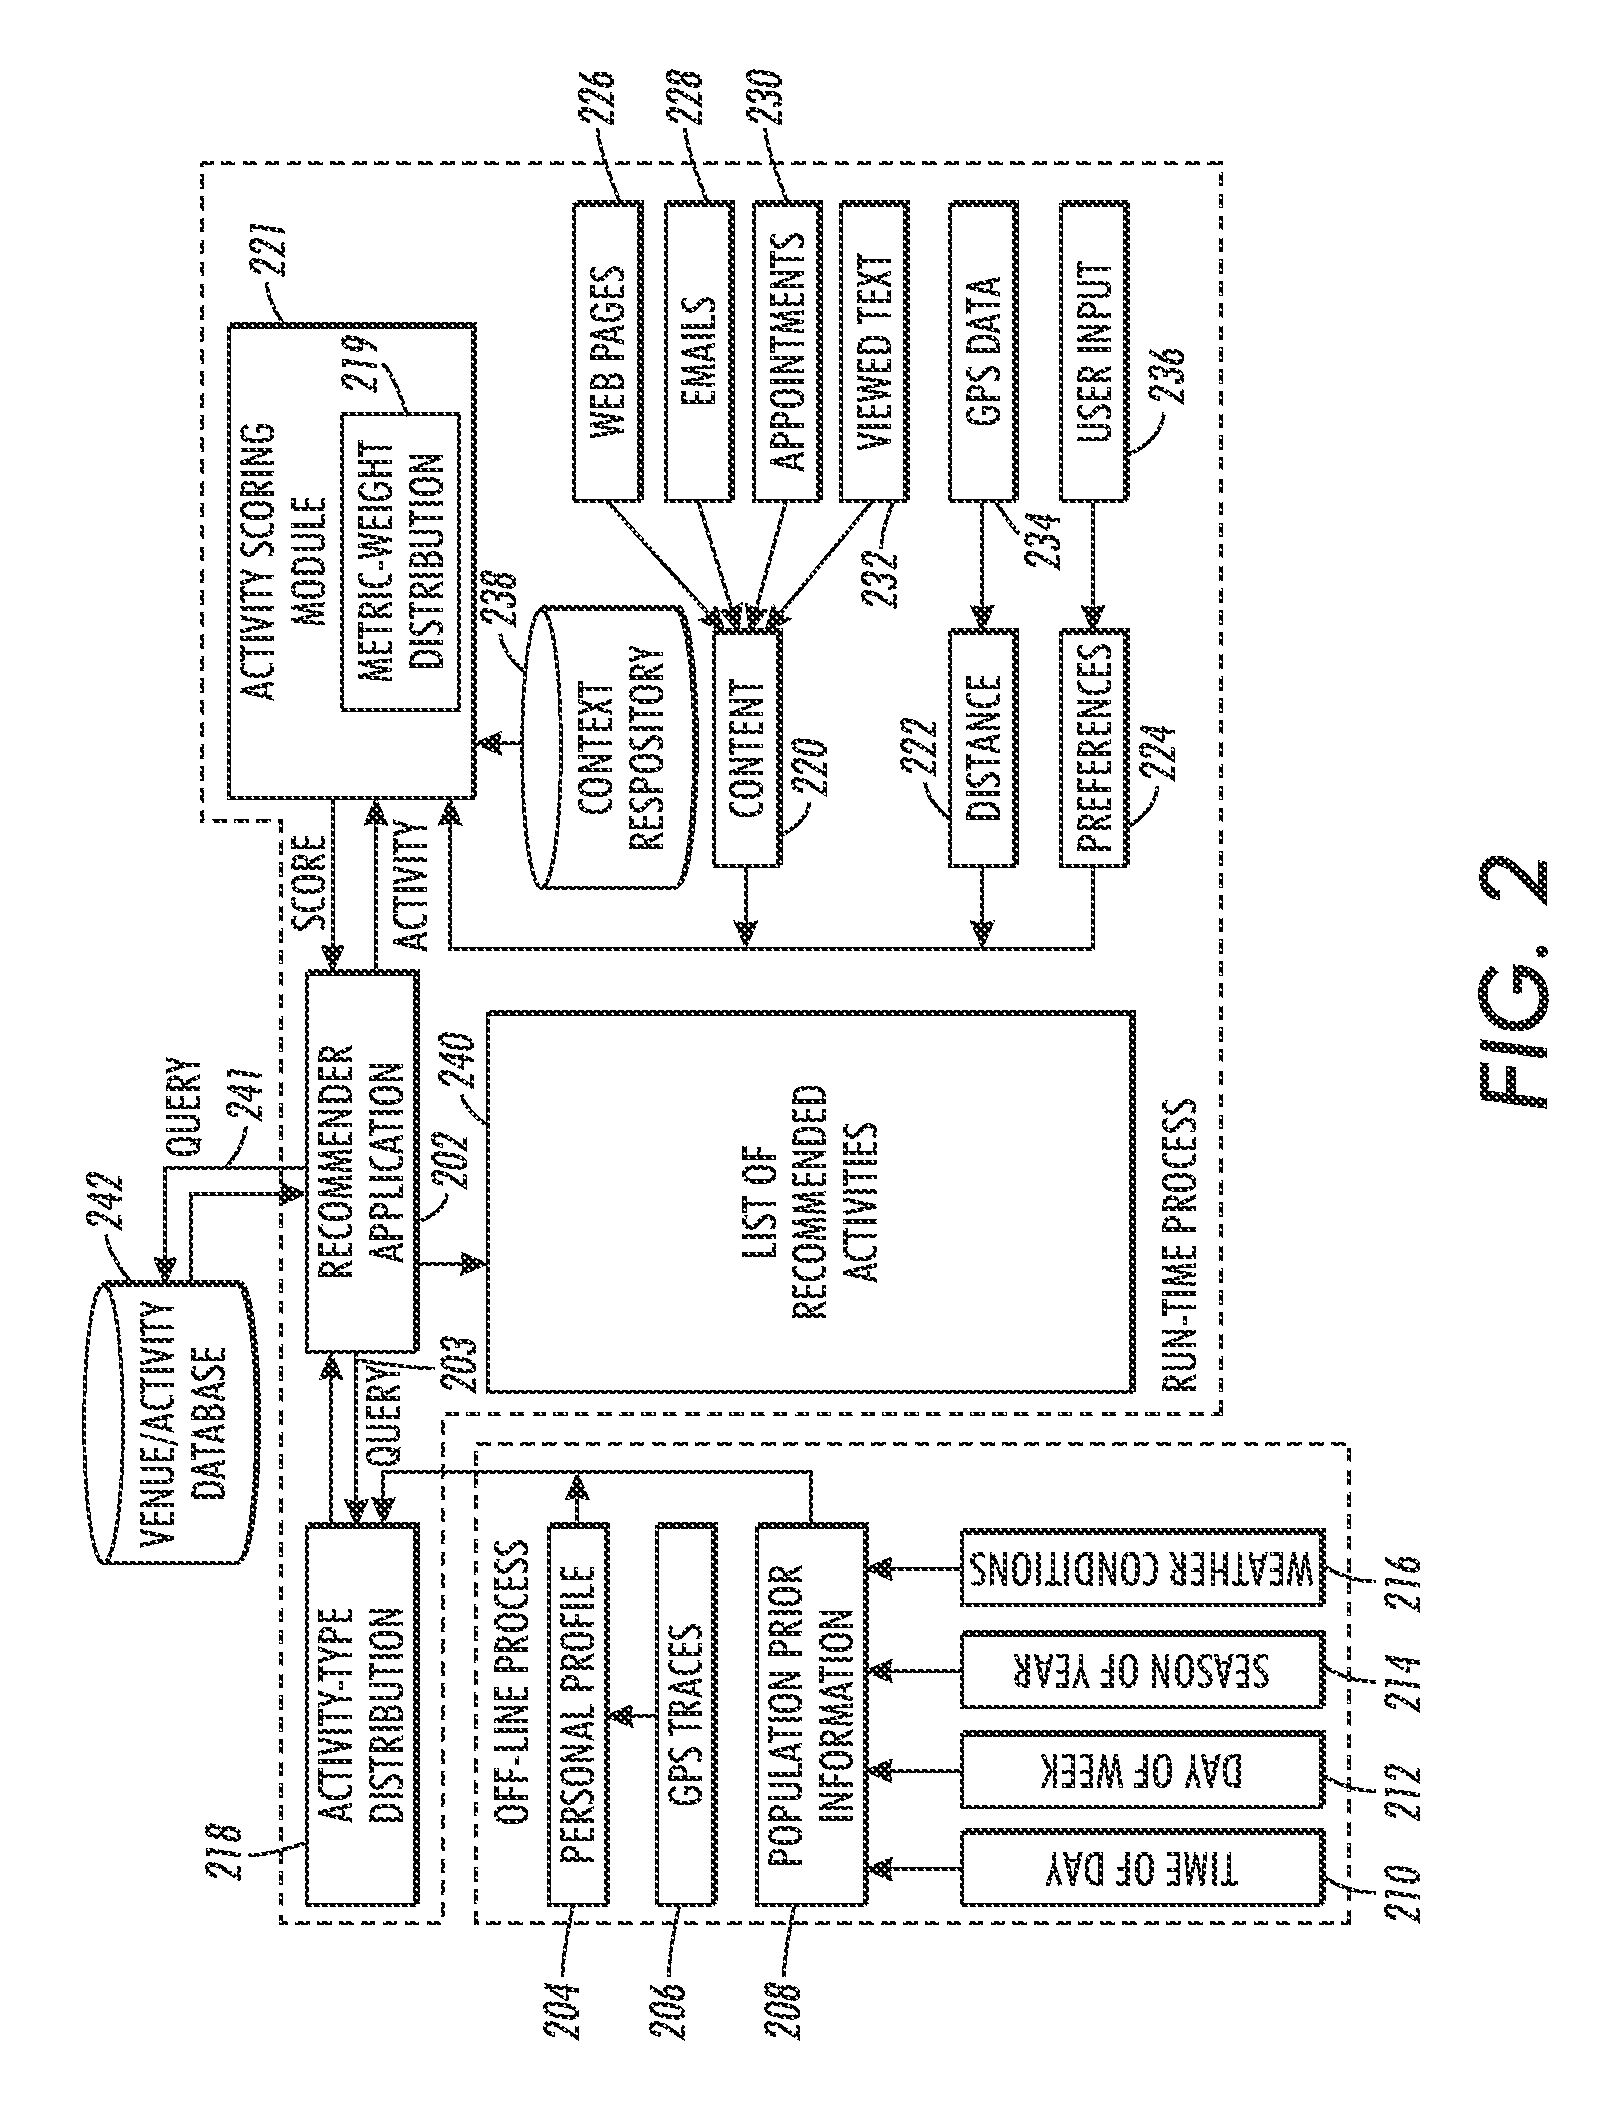 Method and system to predict and recommend future goal-oriented activity